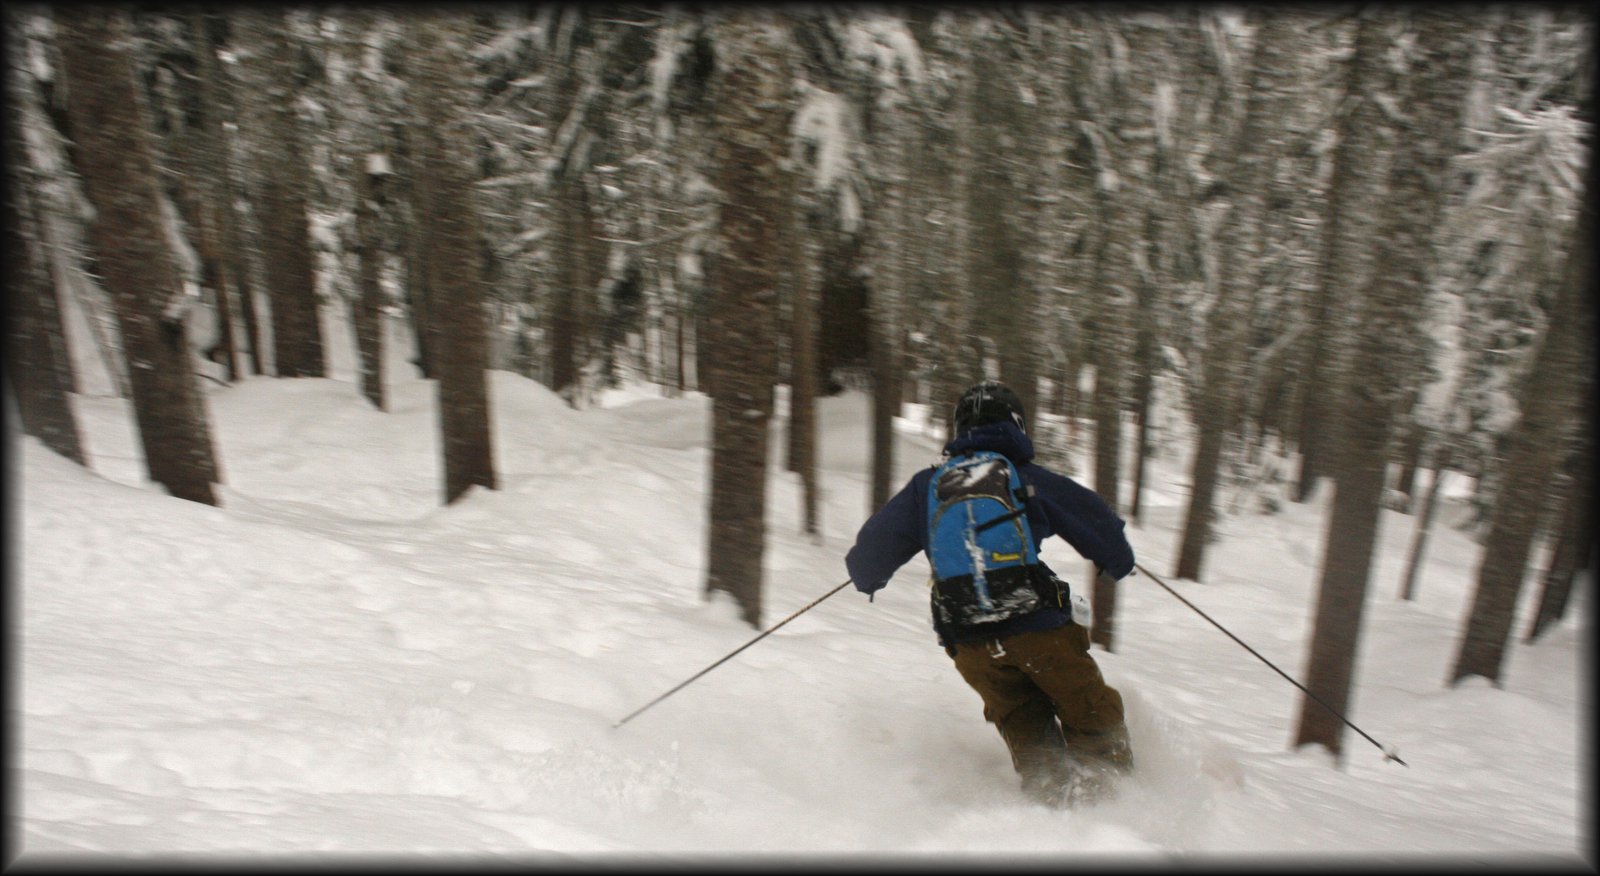 Forest Skiing